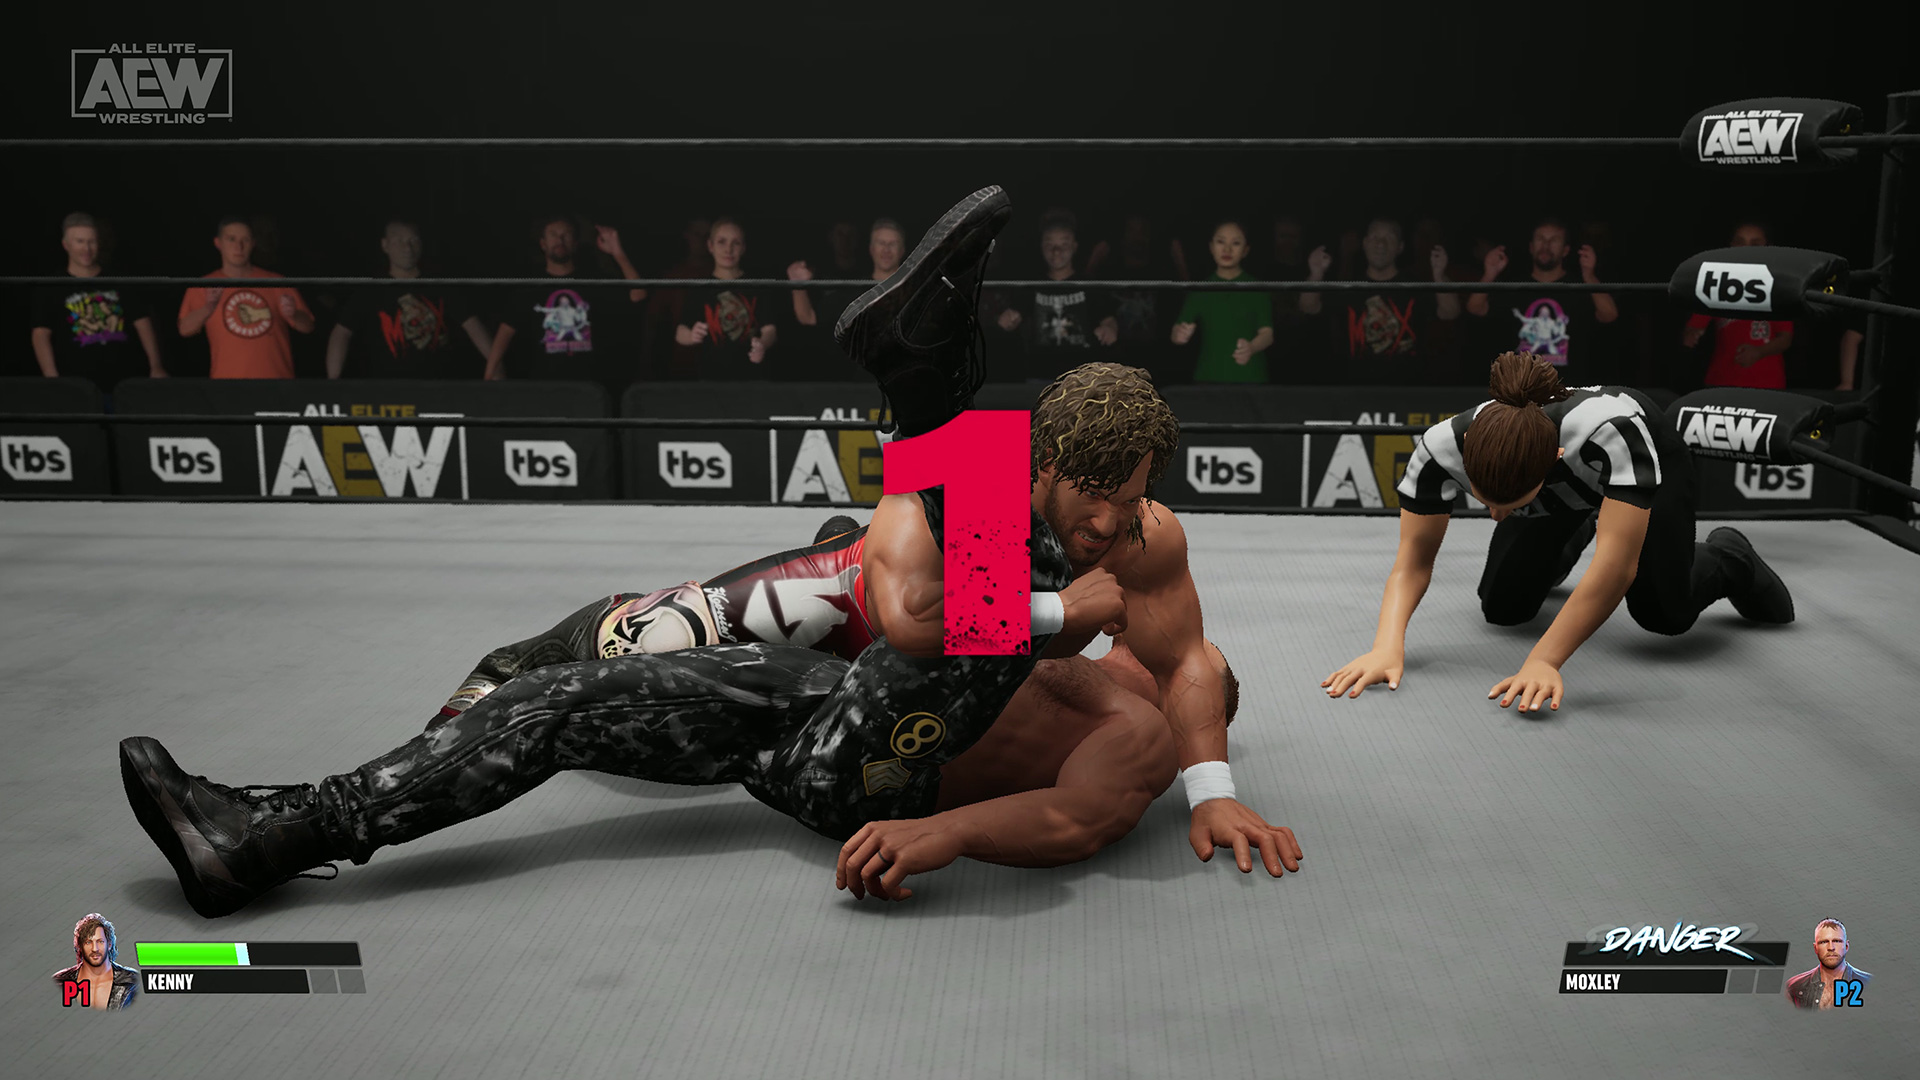 Switch Version of AEW: Fight Forever Still No Confirmed Release Date for Japan